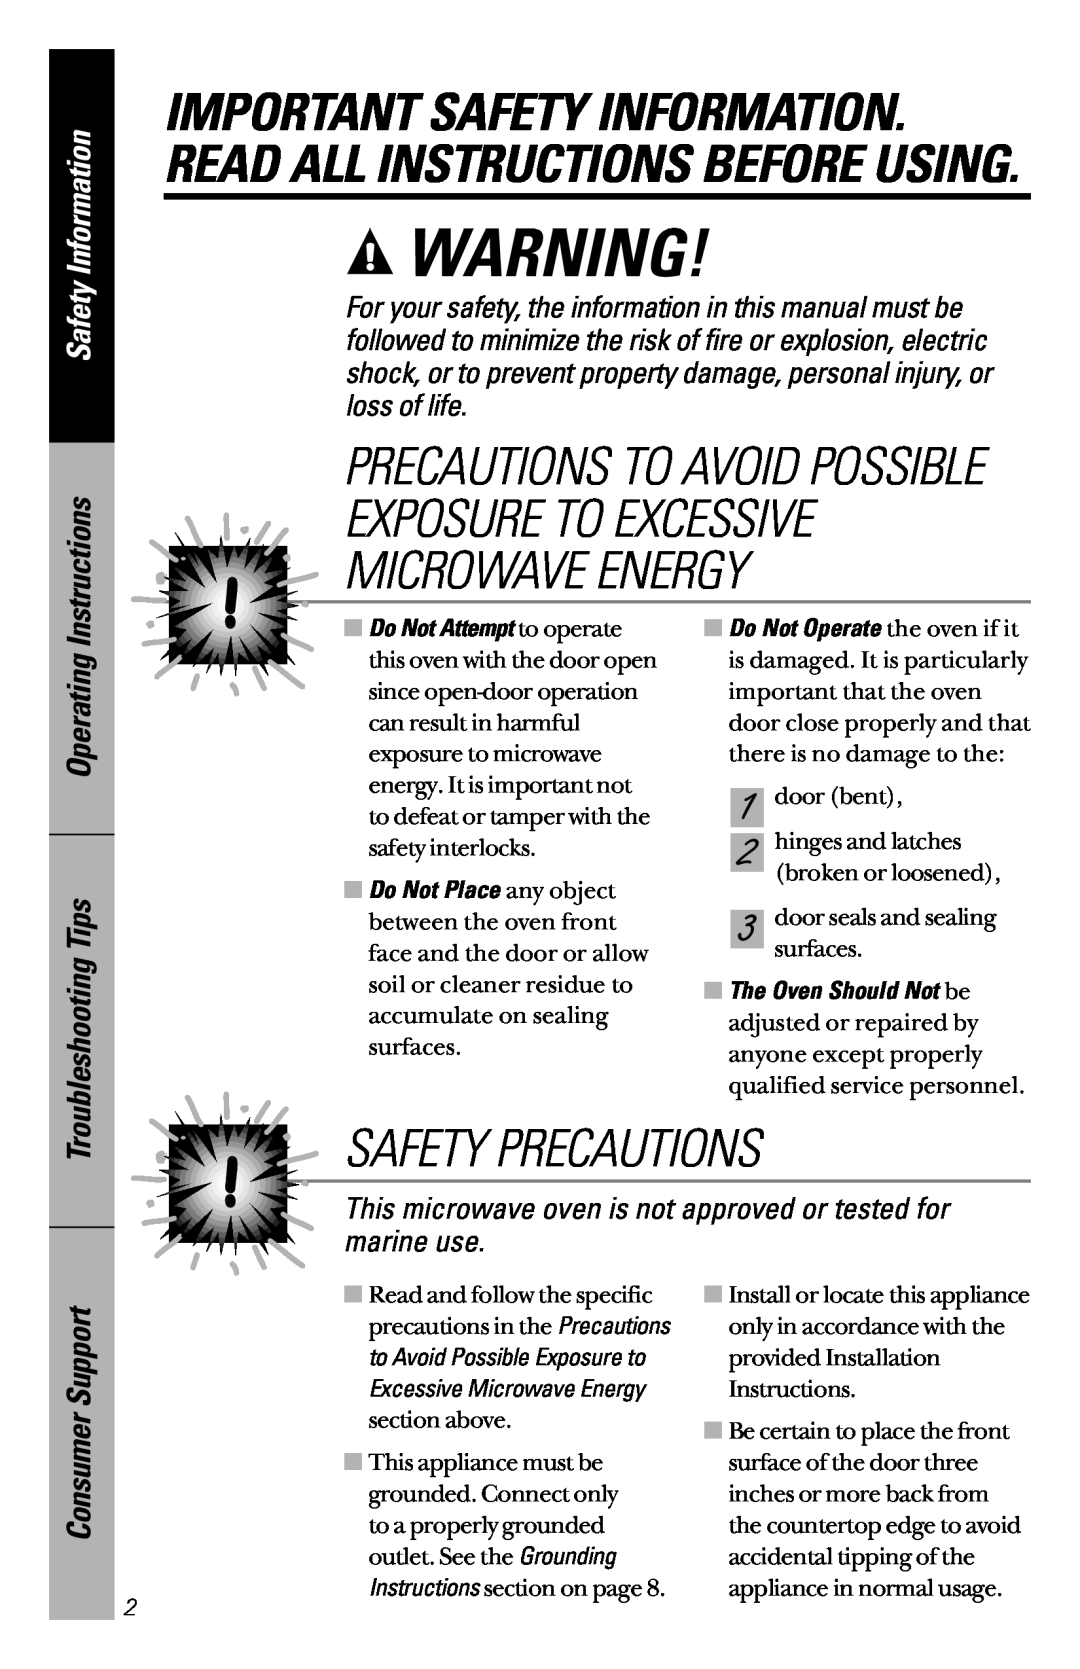 GE JES1334 Exposure To Excessive Microwave Energy, Safety Precautions, Safety Information, Instructions, Consumer Support 